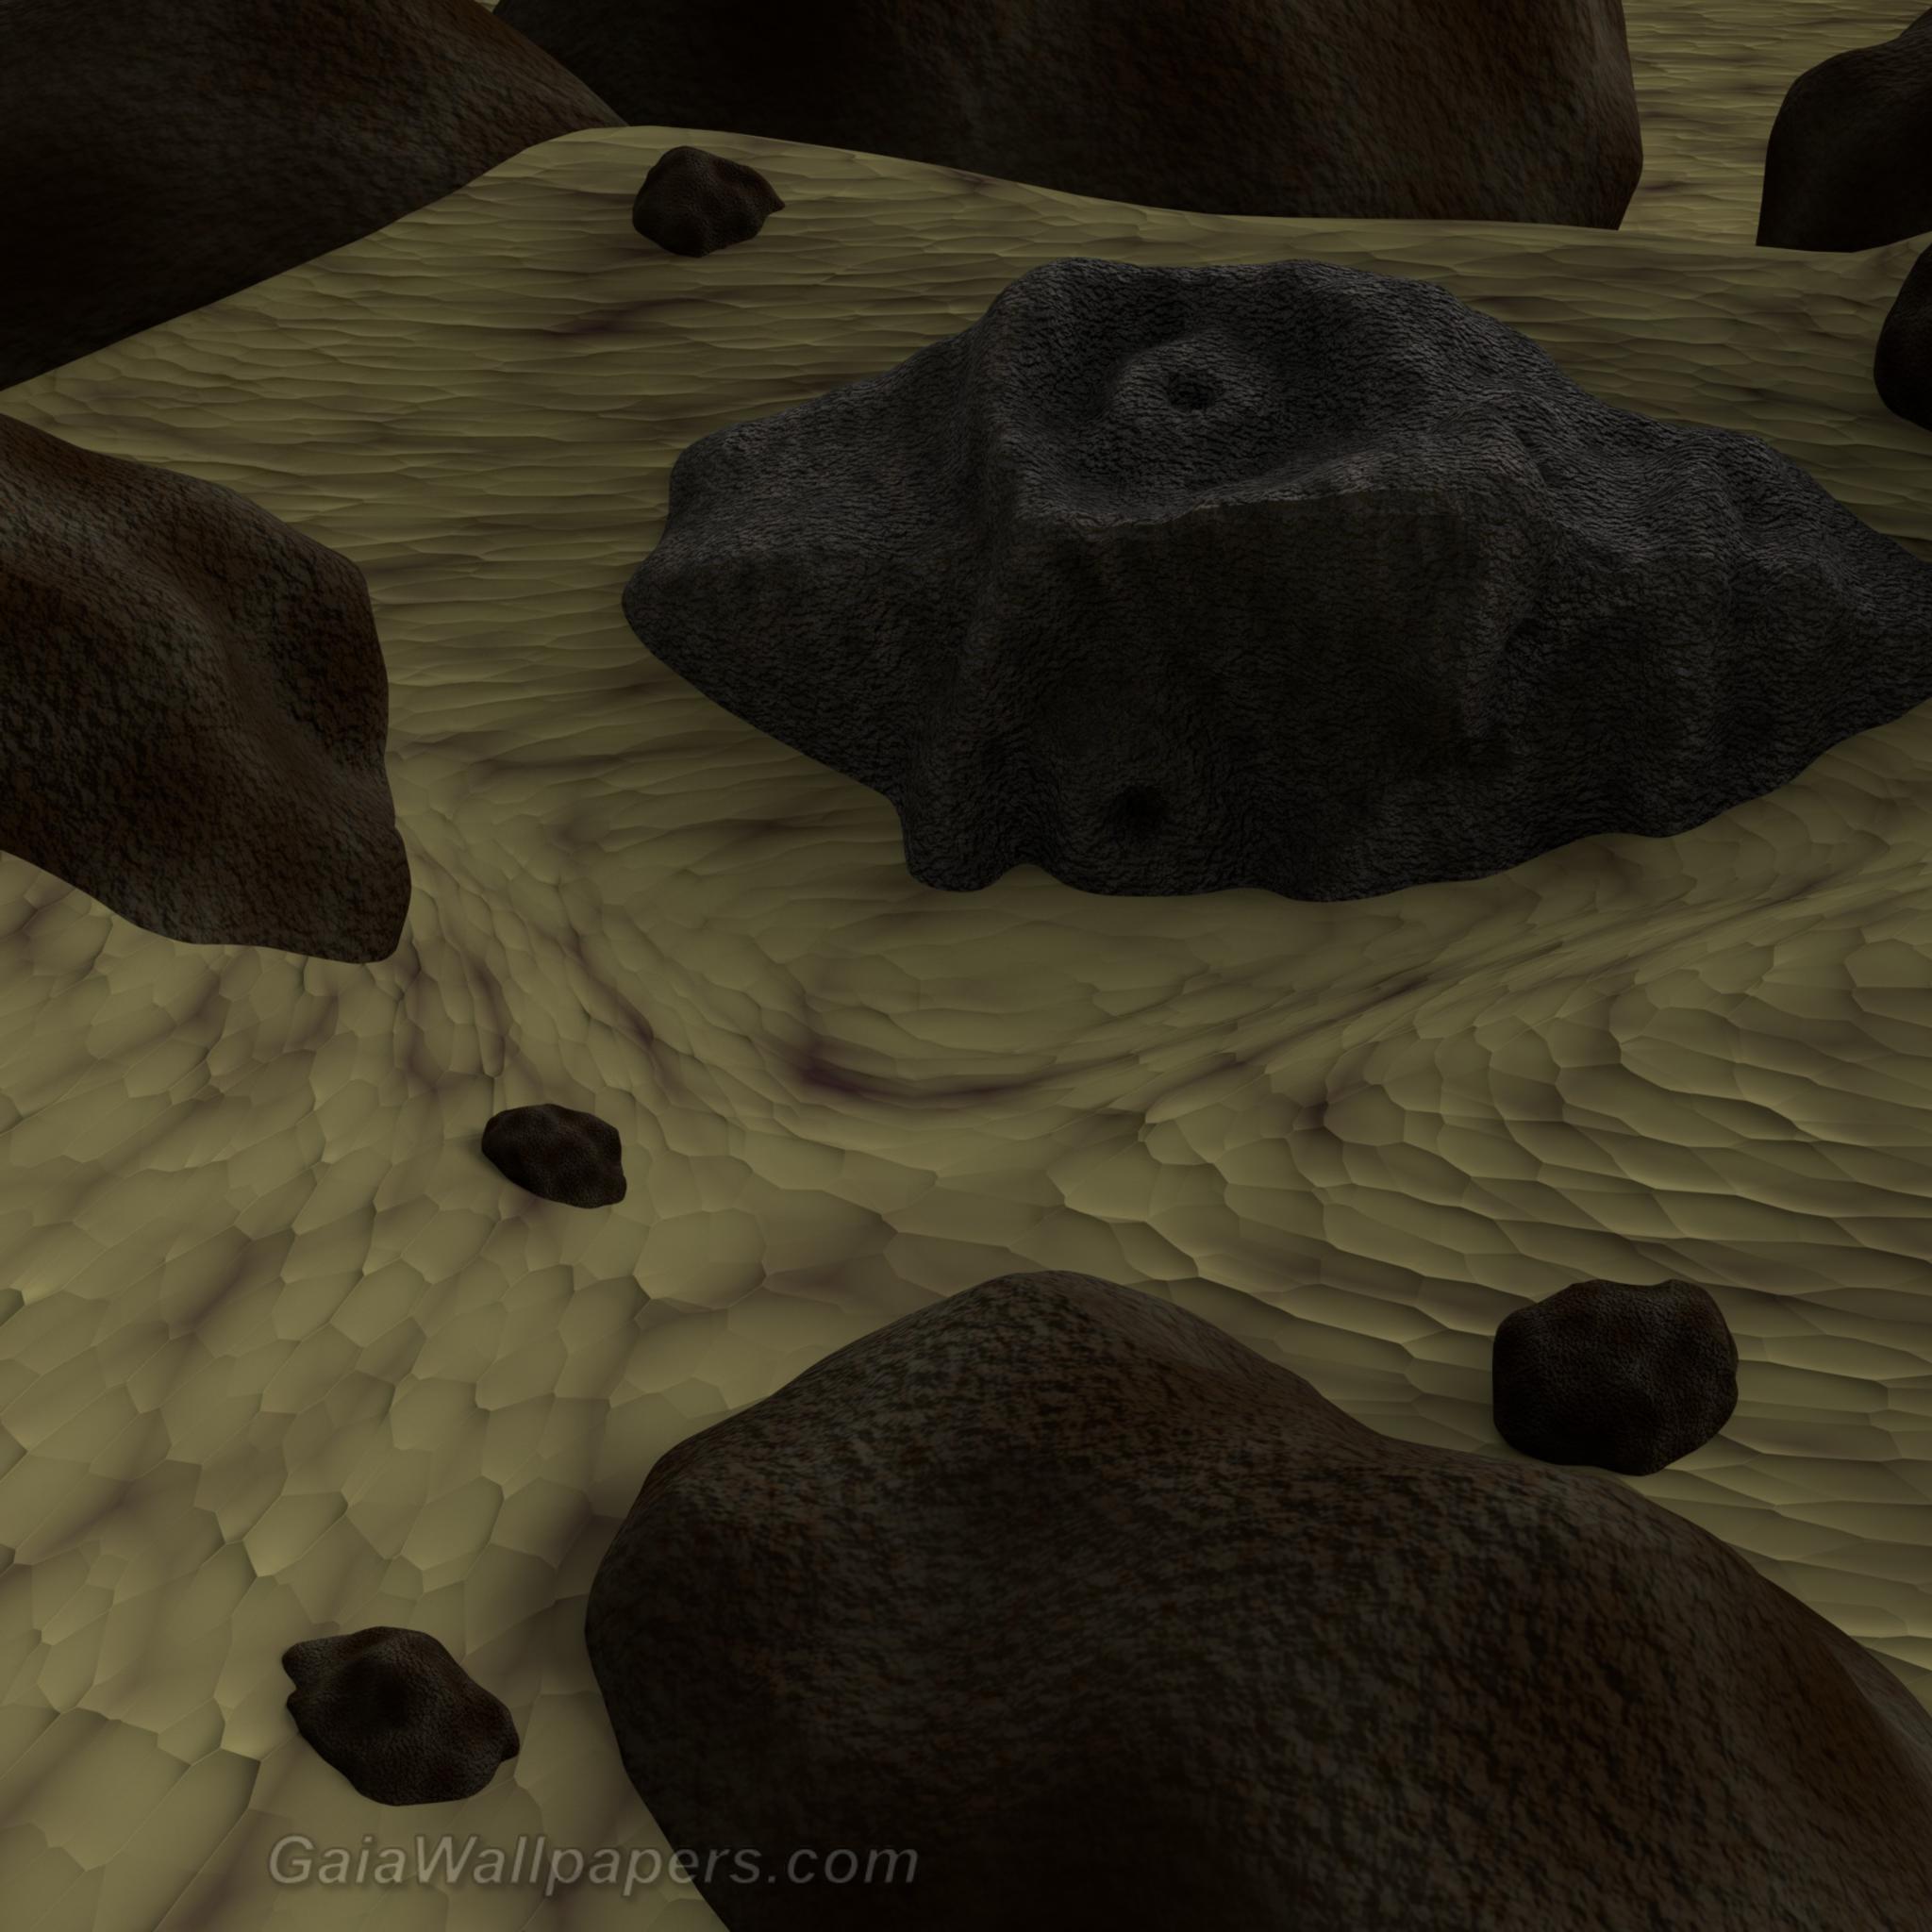 Forgotten stone face in the sand - Free desktop wallpapers